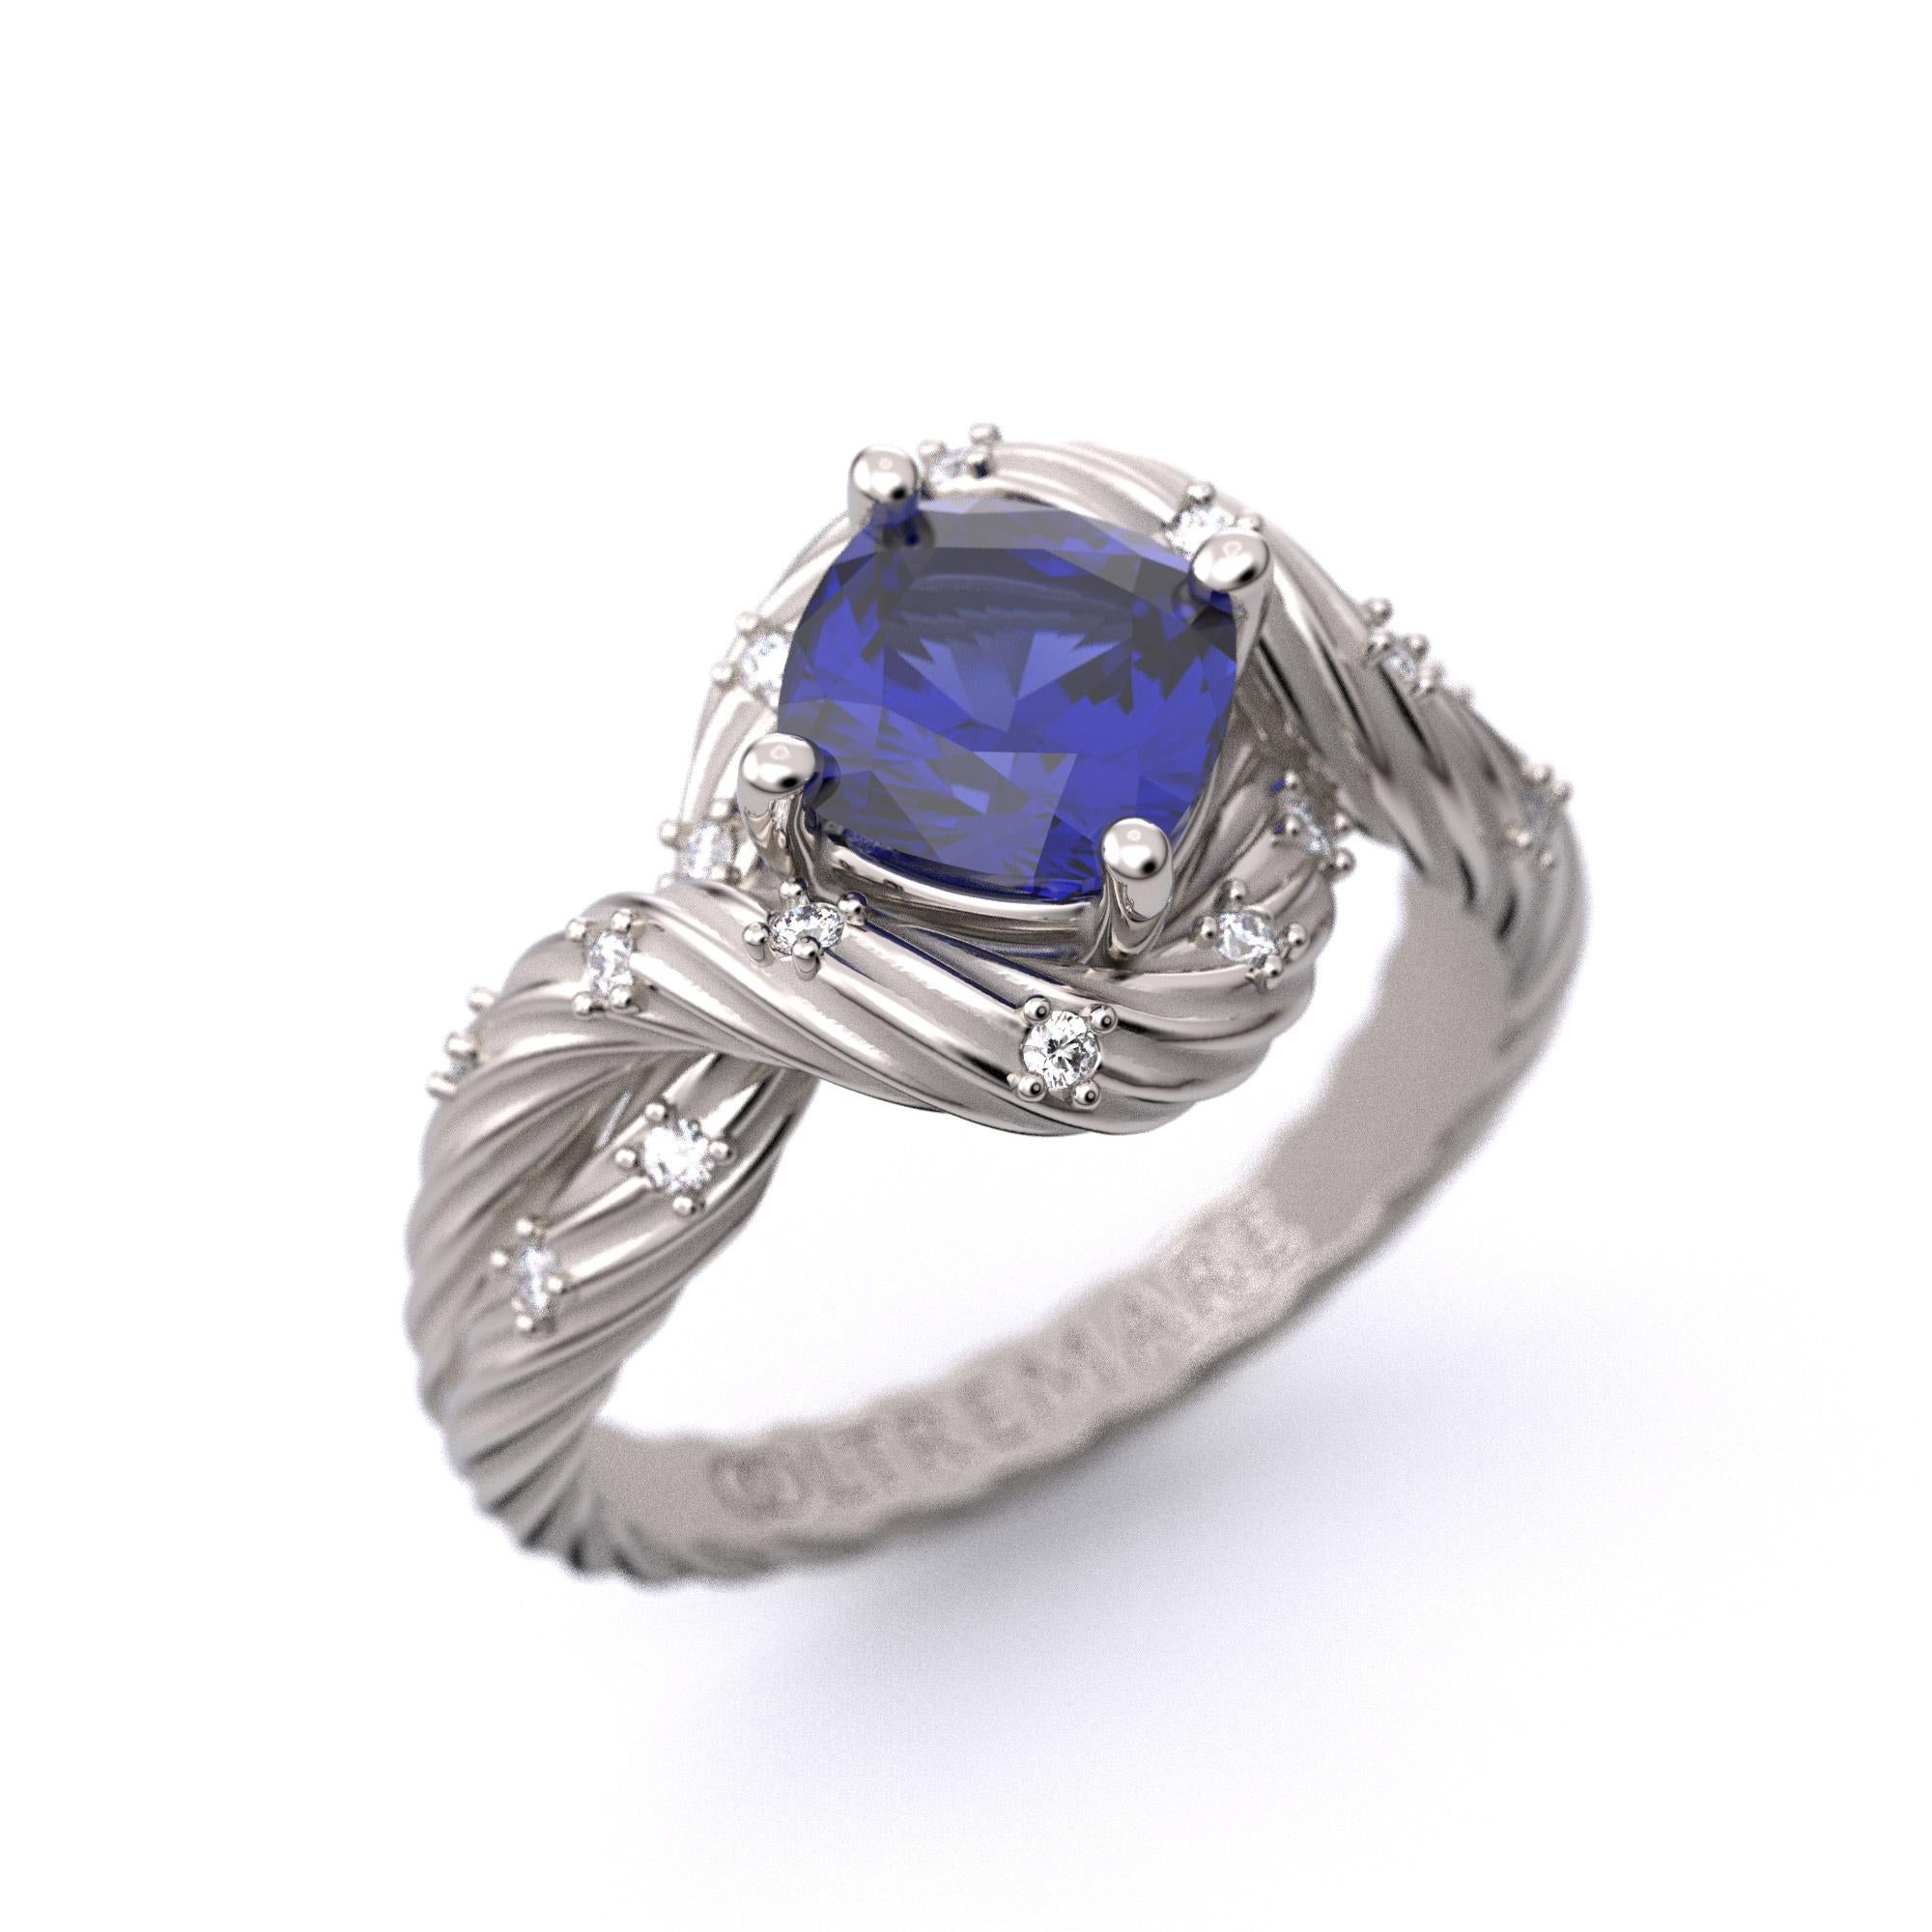 For Sale:  Tanzanite and Diamonds Ring 14k Solid Gold, Italian Fine Jewelry, made to order. 10